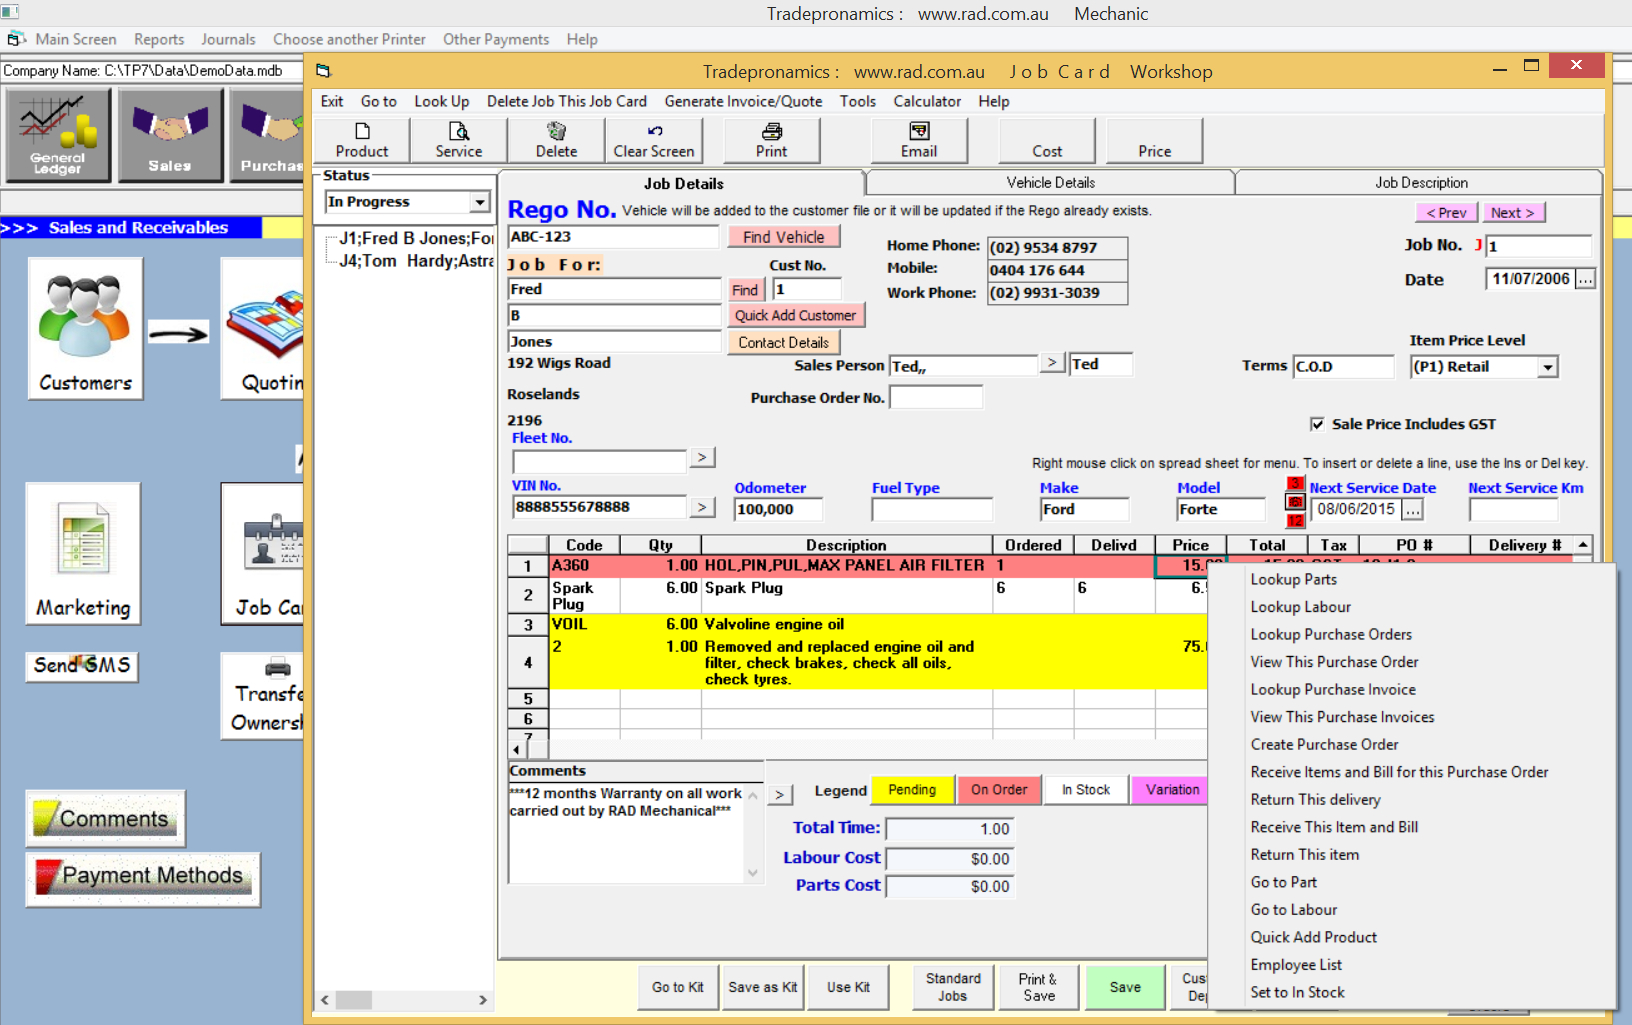 Auto Repair Invoice Software | Workshop Manager Software With Mechanics Job Card Template